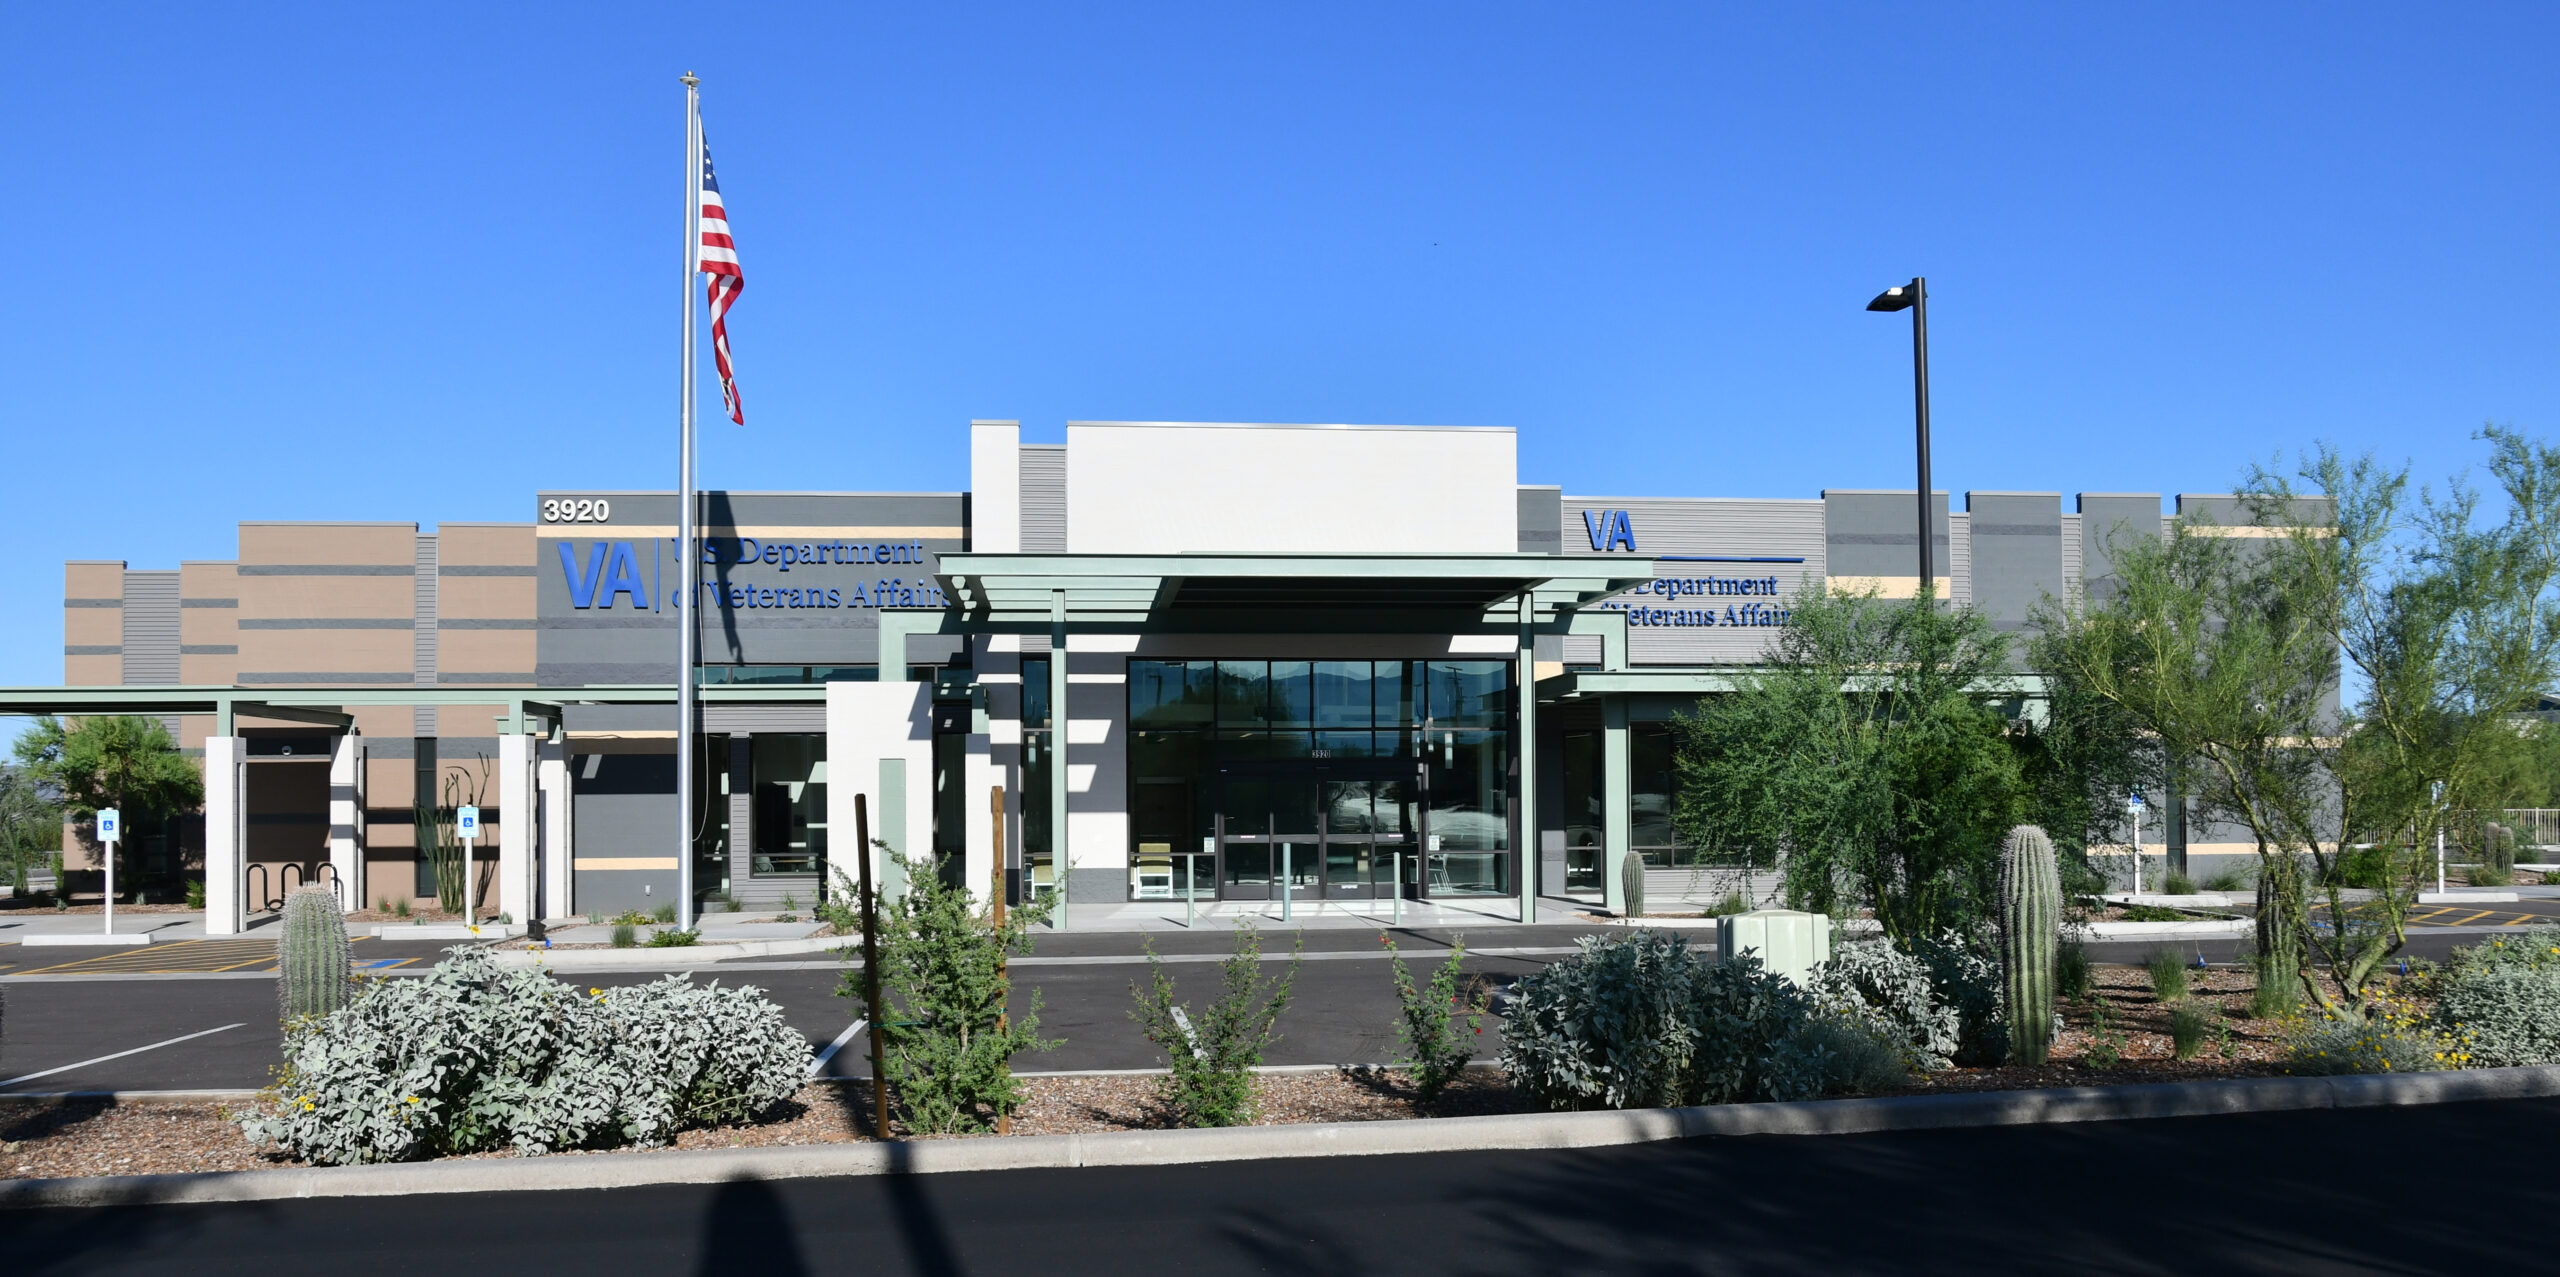 Construction Complete on New Northwest VA Clinic in Tucson